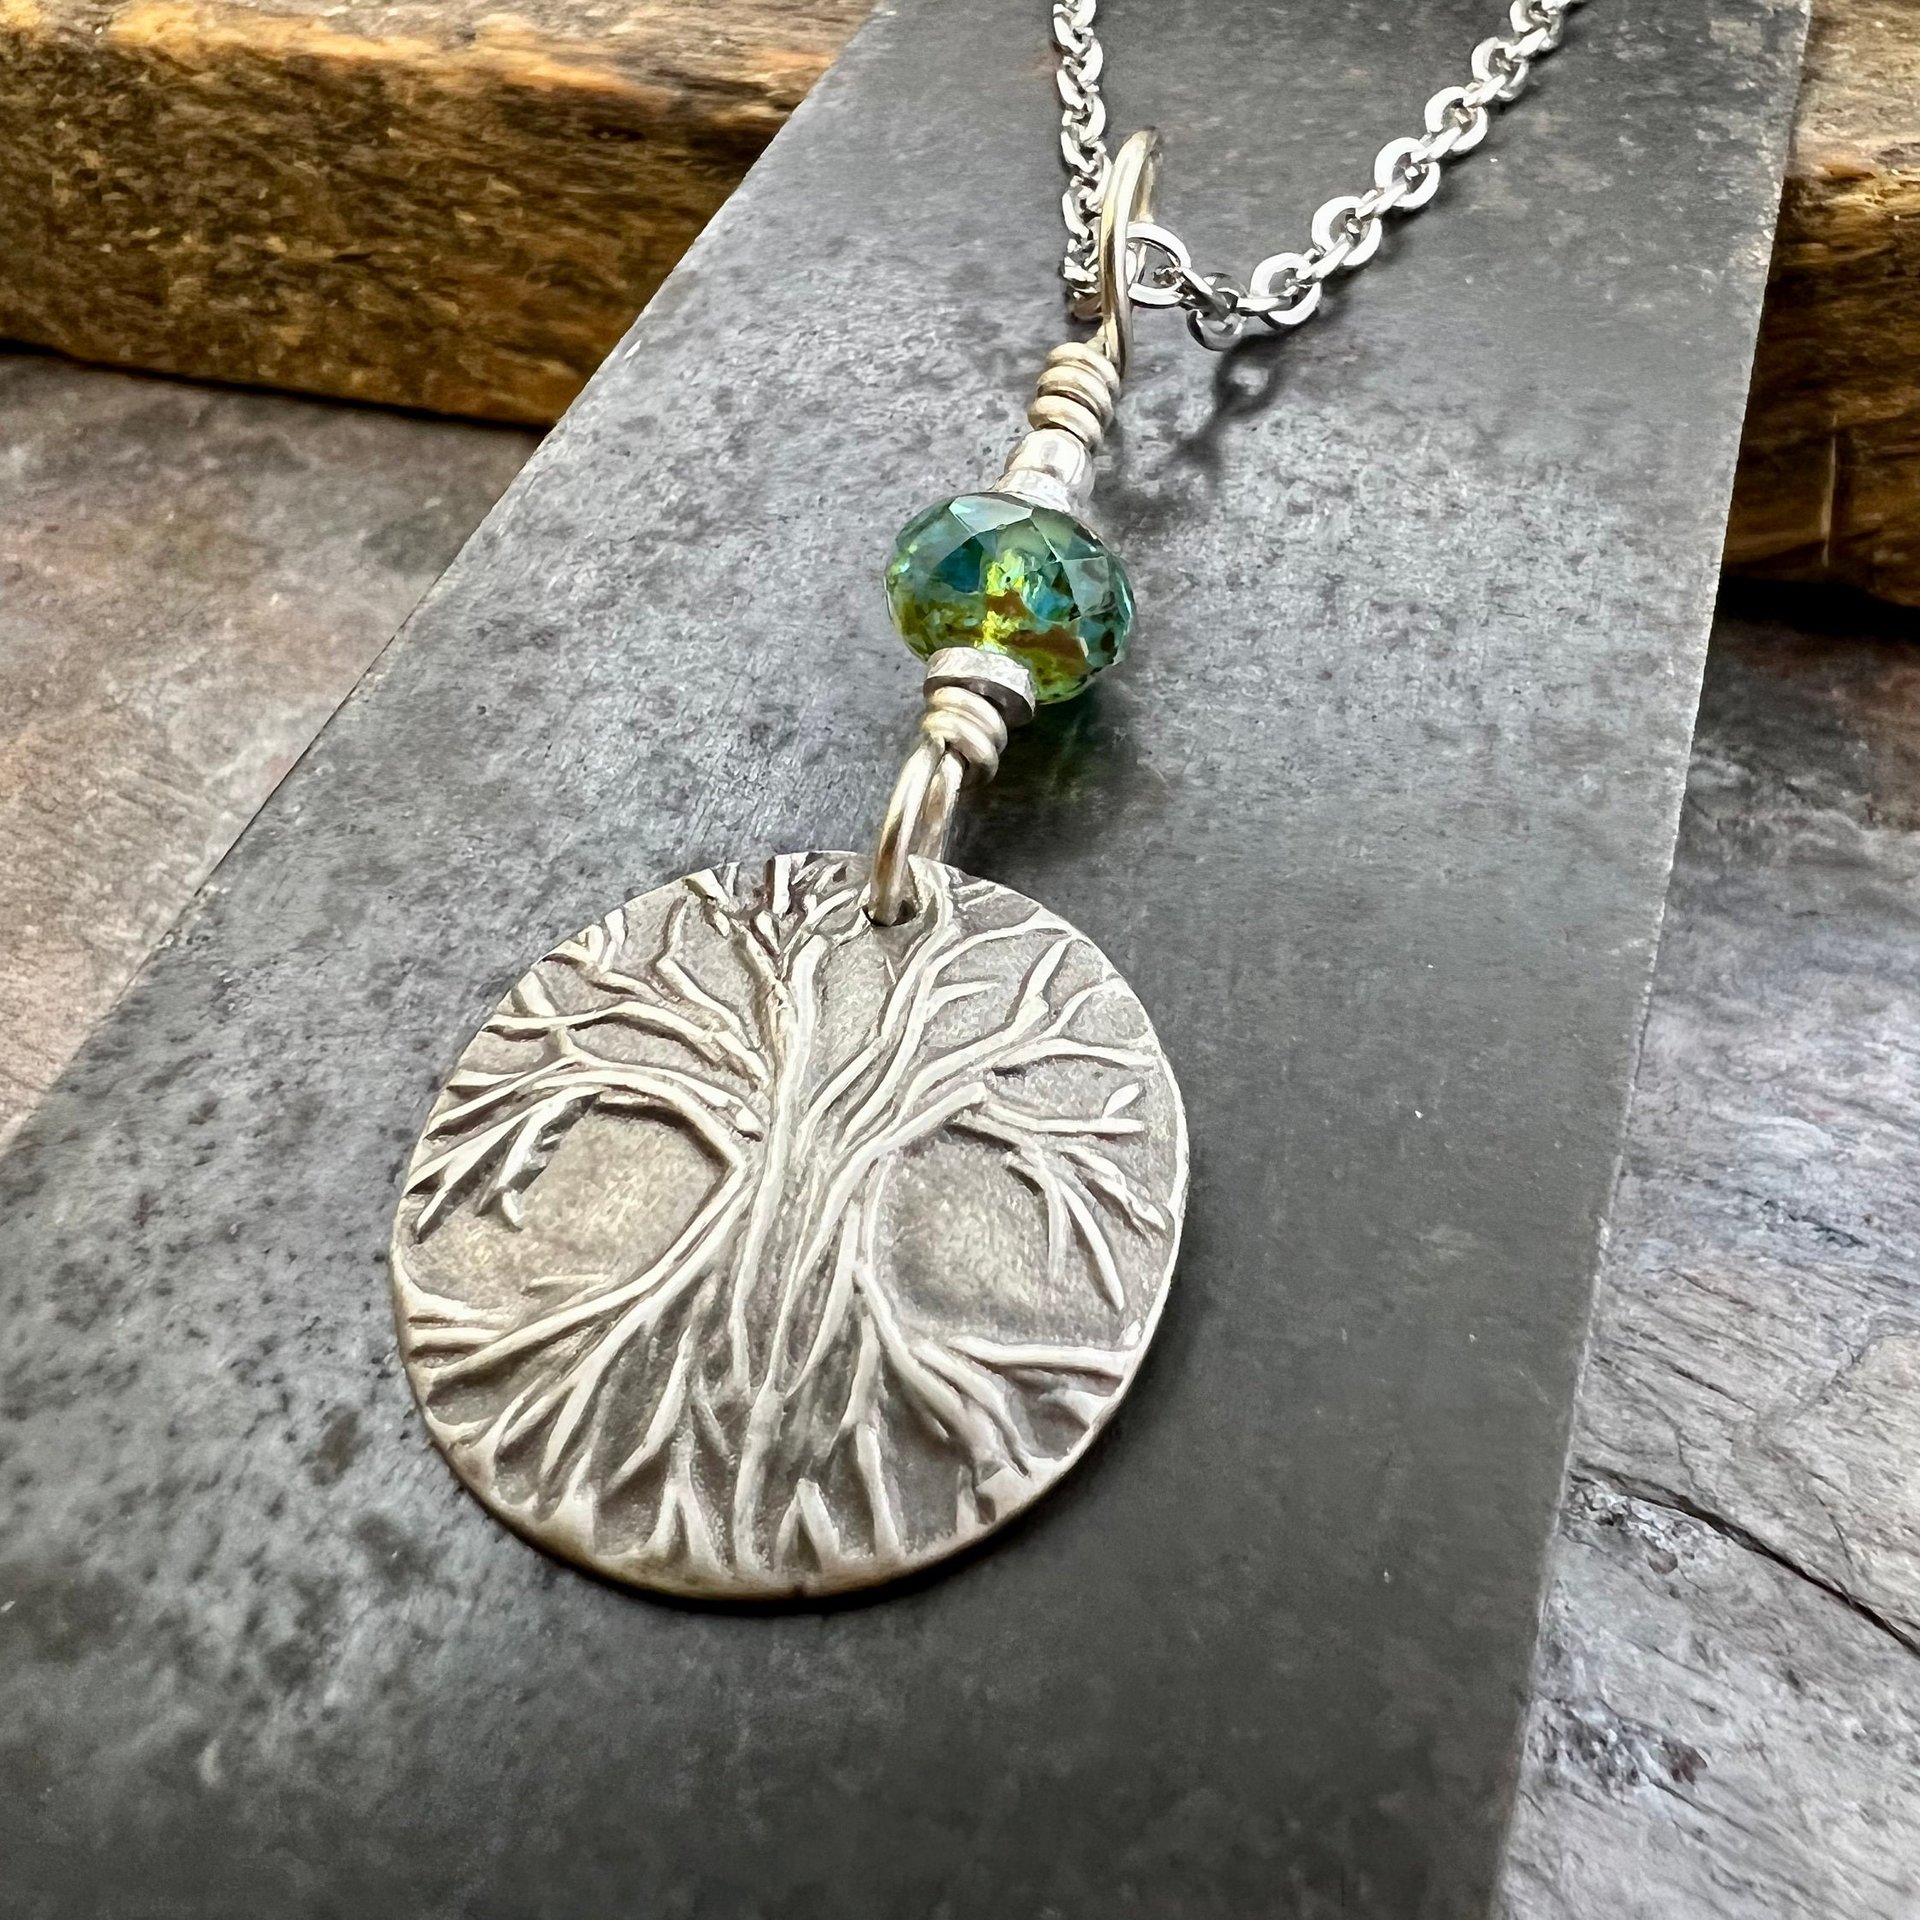 Tree of Life, Sterling Silver Charm, Czech Glass, Silver Tree Necklace, Leather & Vegan Cords, Stainless Steel Chain, Earthy Nature Gifts